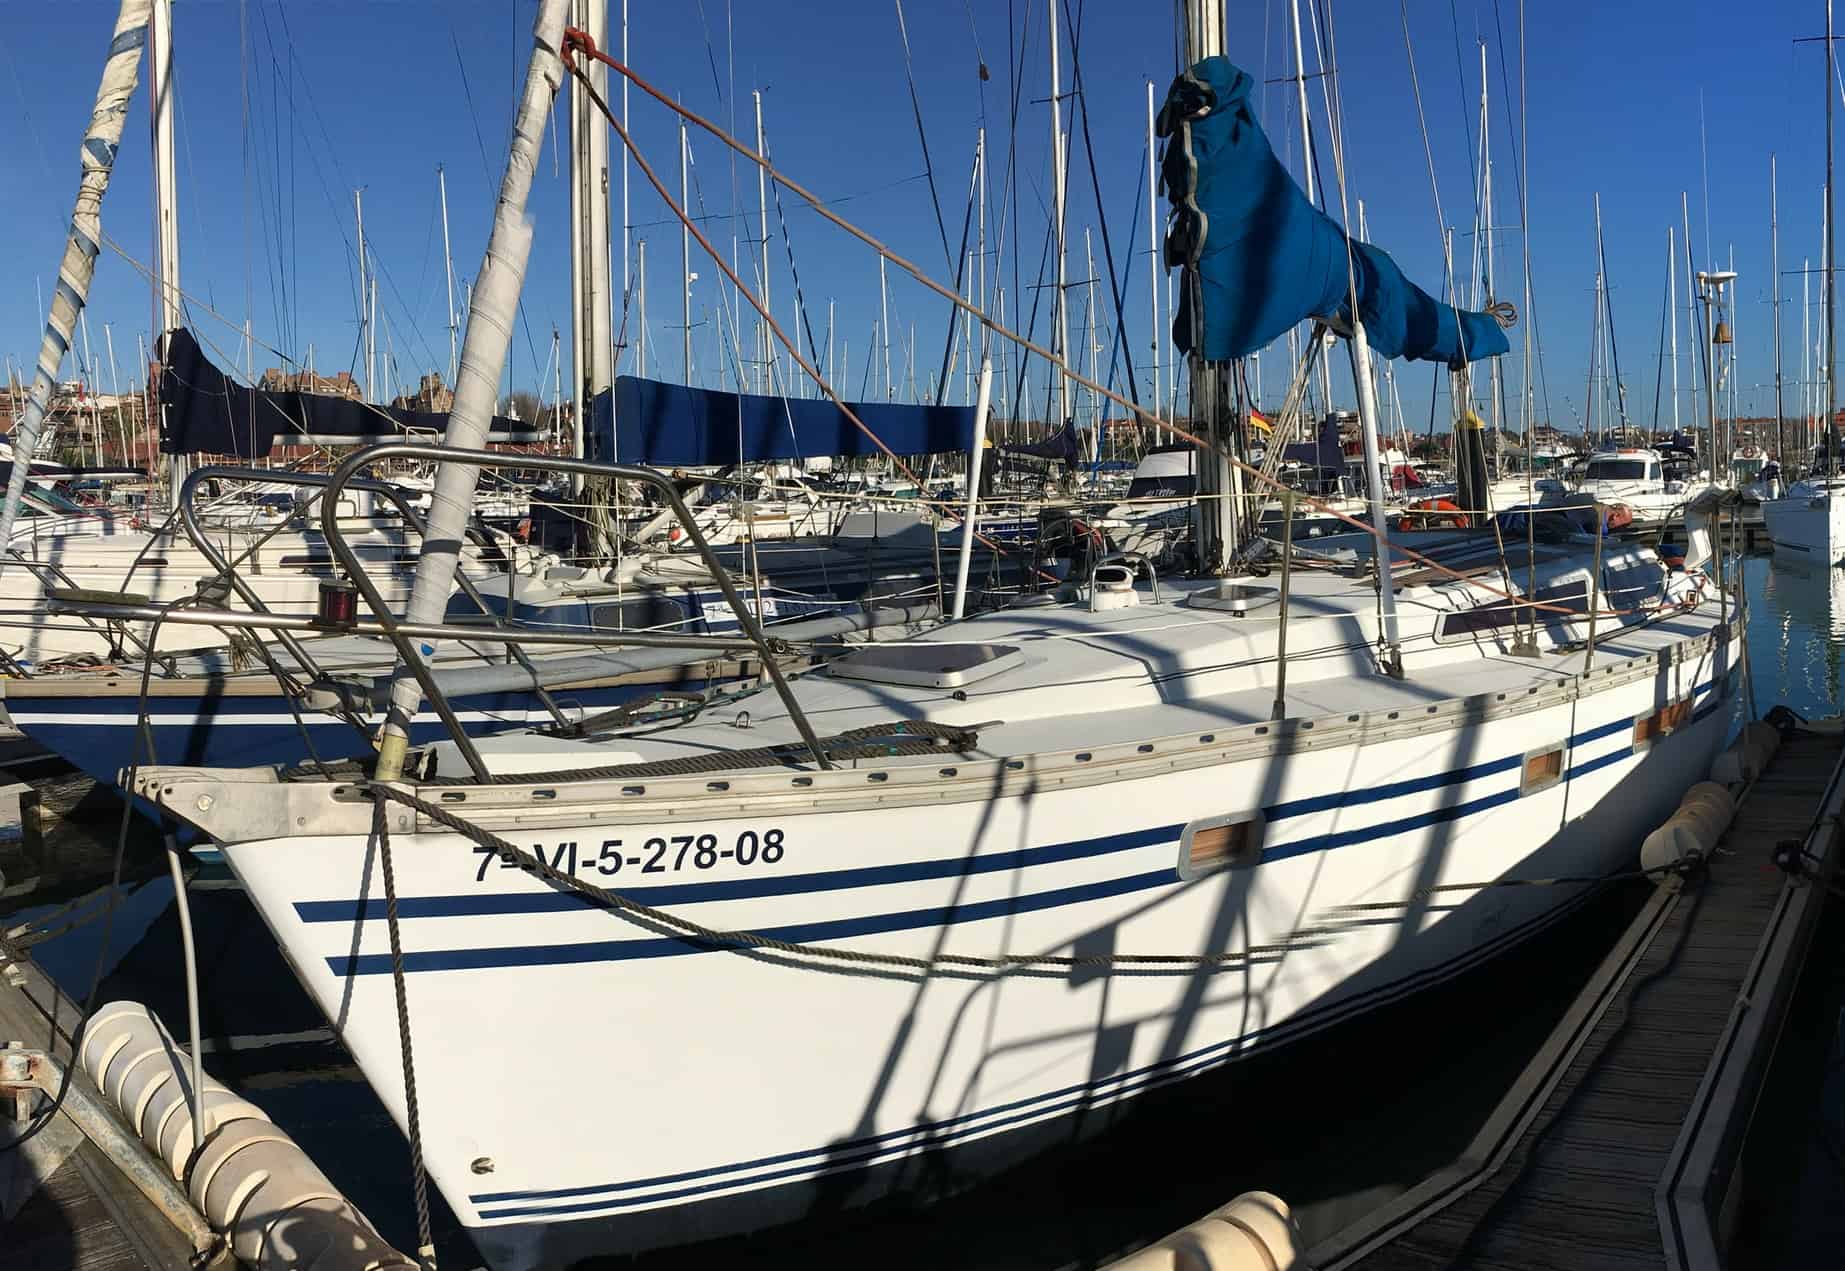 A Jeanneau Voyage Yacht moored in a marina ready for delivery.